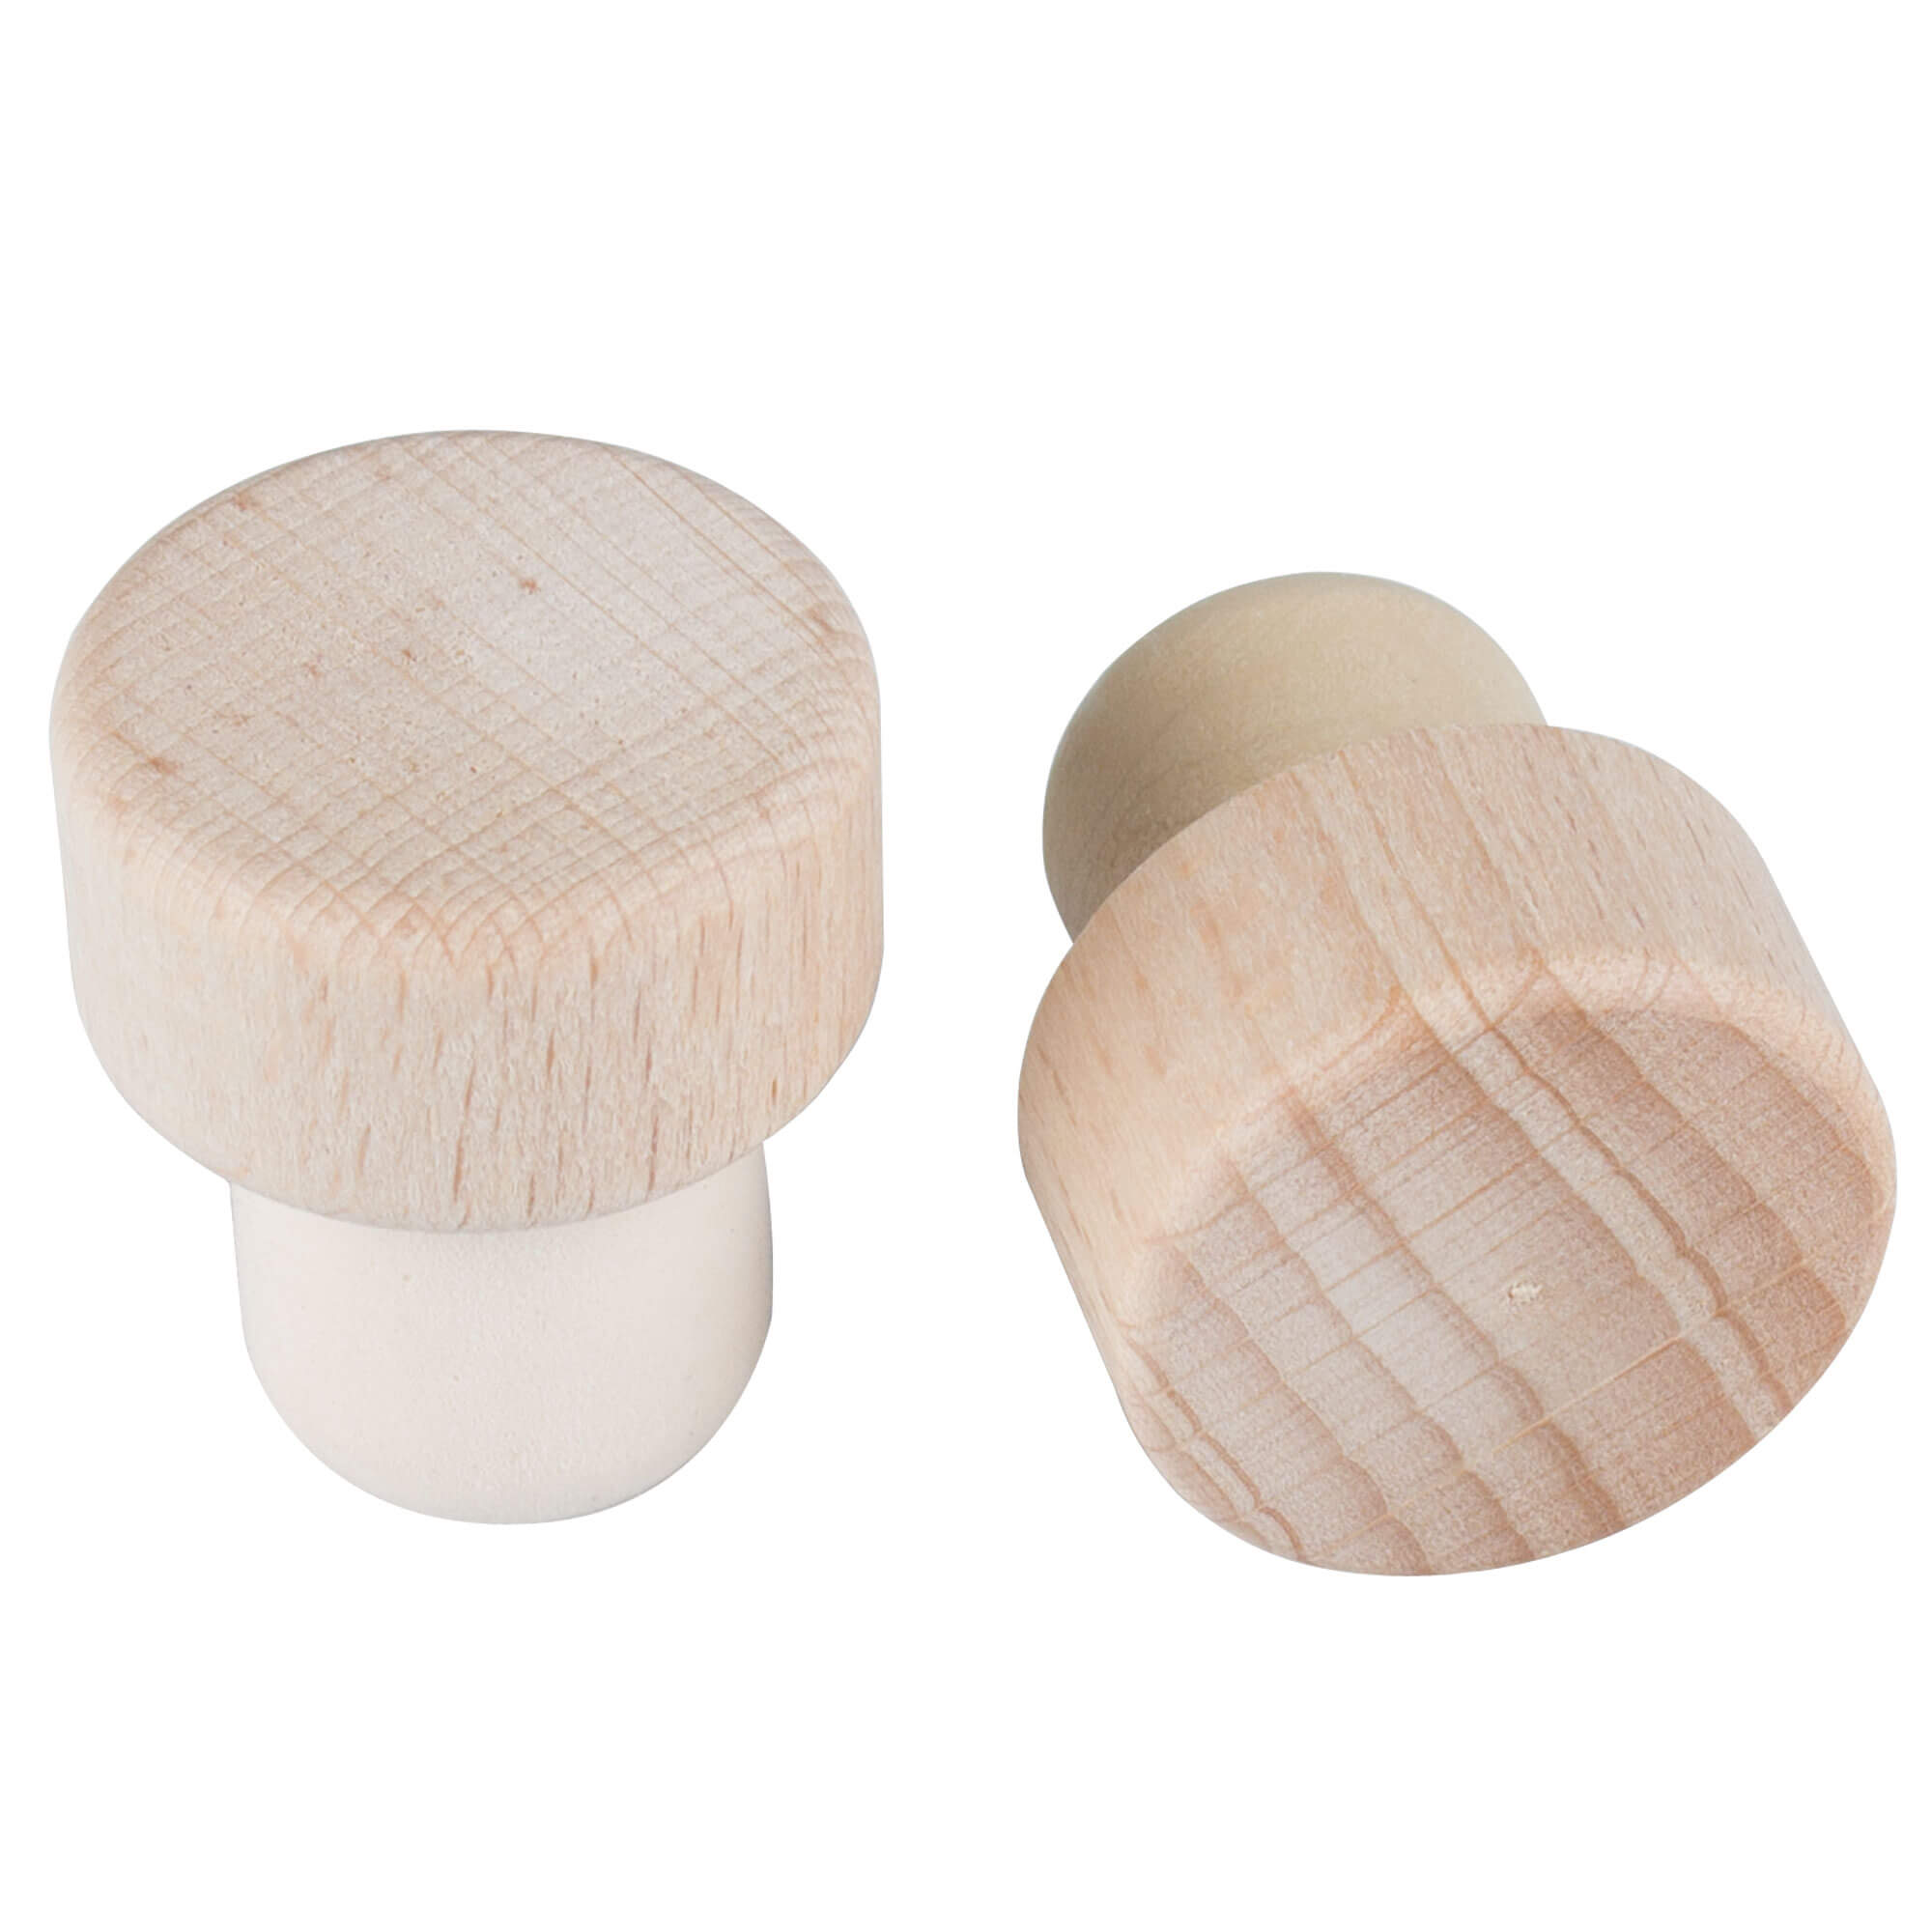 Bottle stopper PE 19mm, with wooden disc (1 pc.)